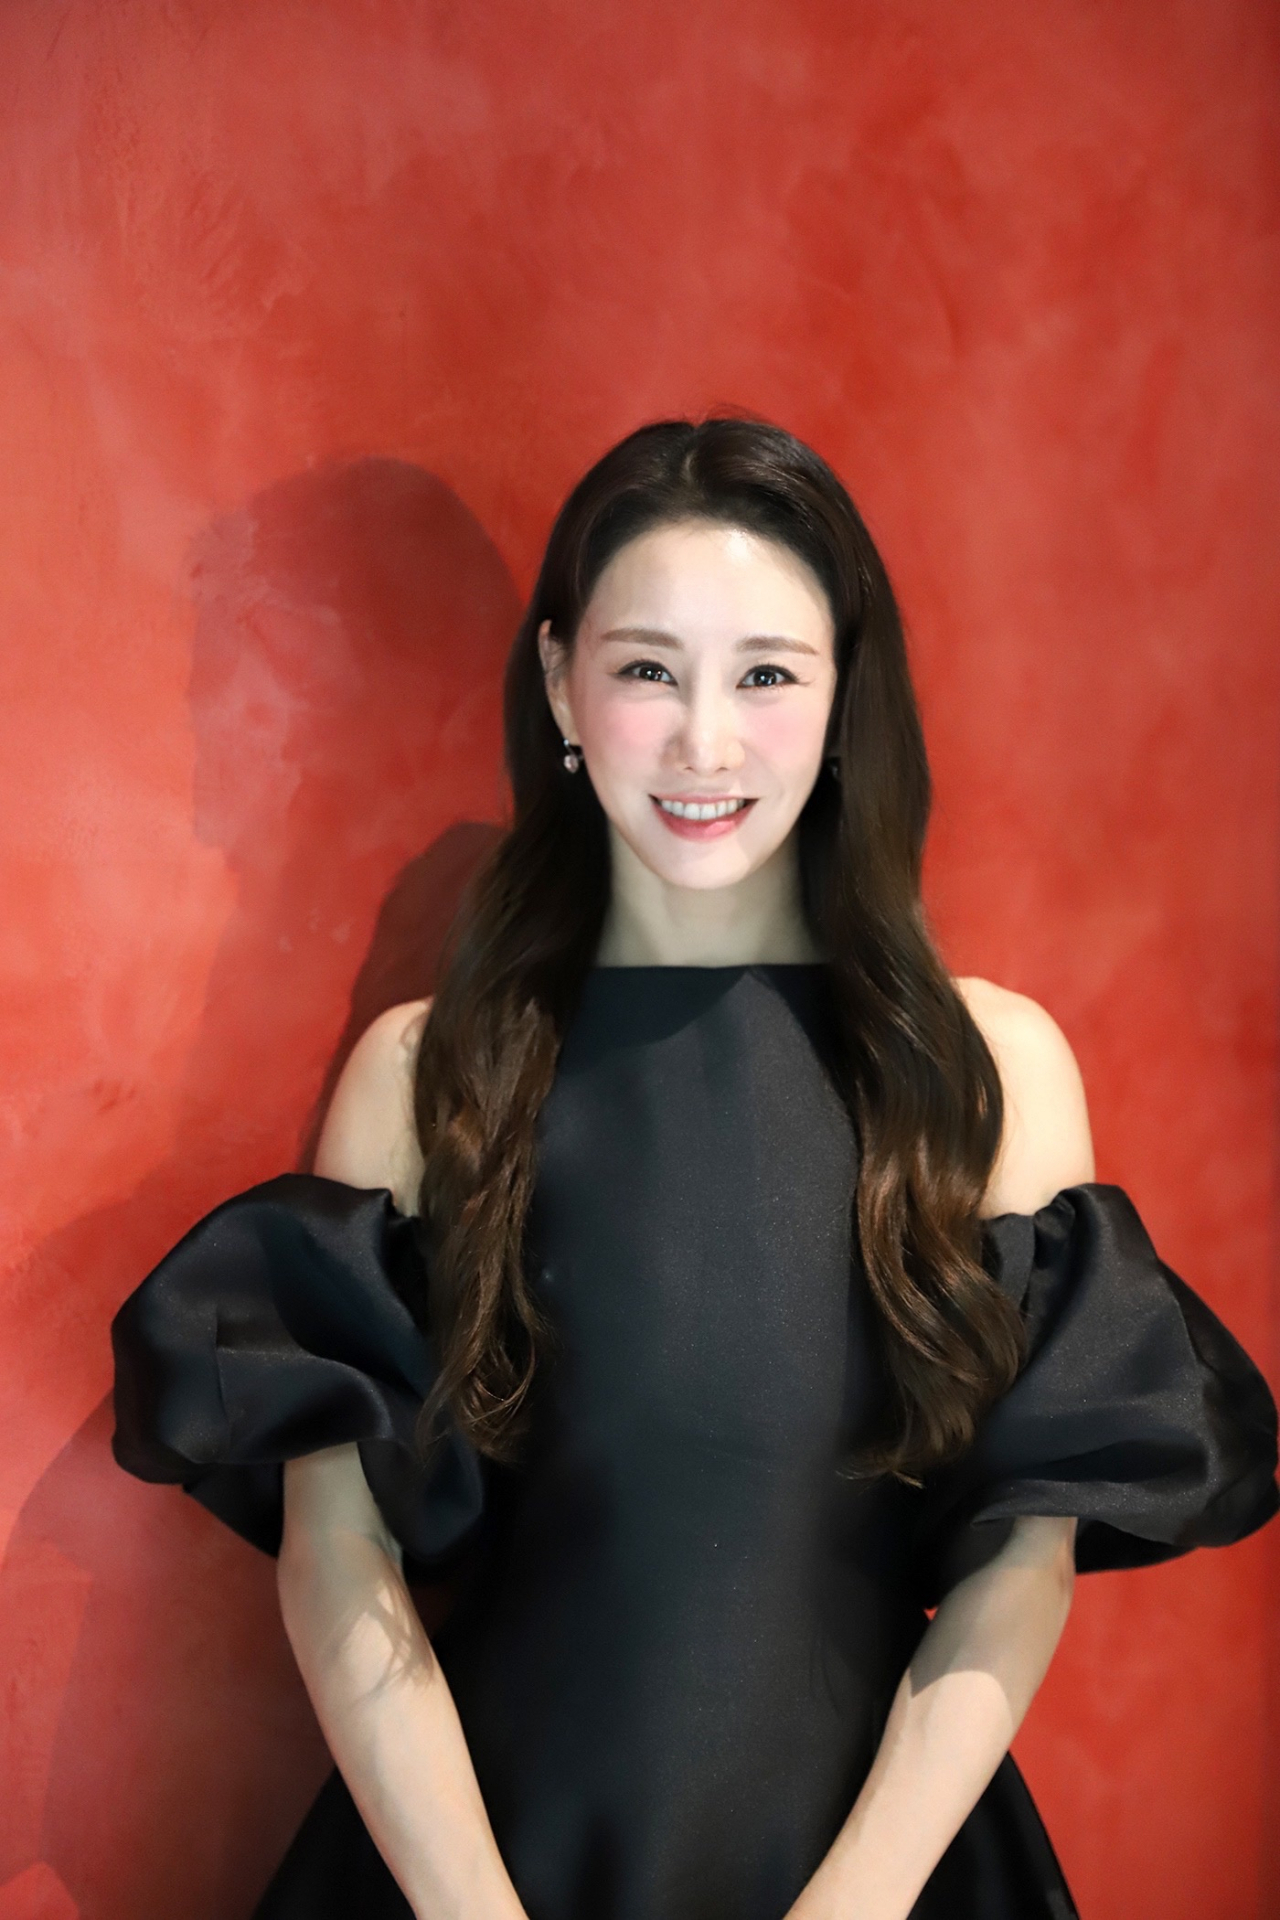 Musical stage actor Kim So-hyang, also known as Sophie Kim, poses for photos during an interview at the headquarters of EMK Musical Company in Seoul on Tuesday. (EMK Entertainment)